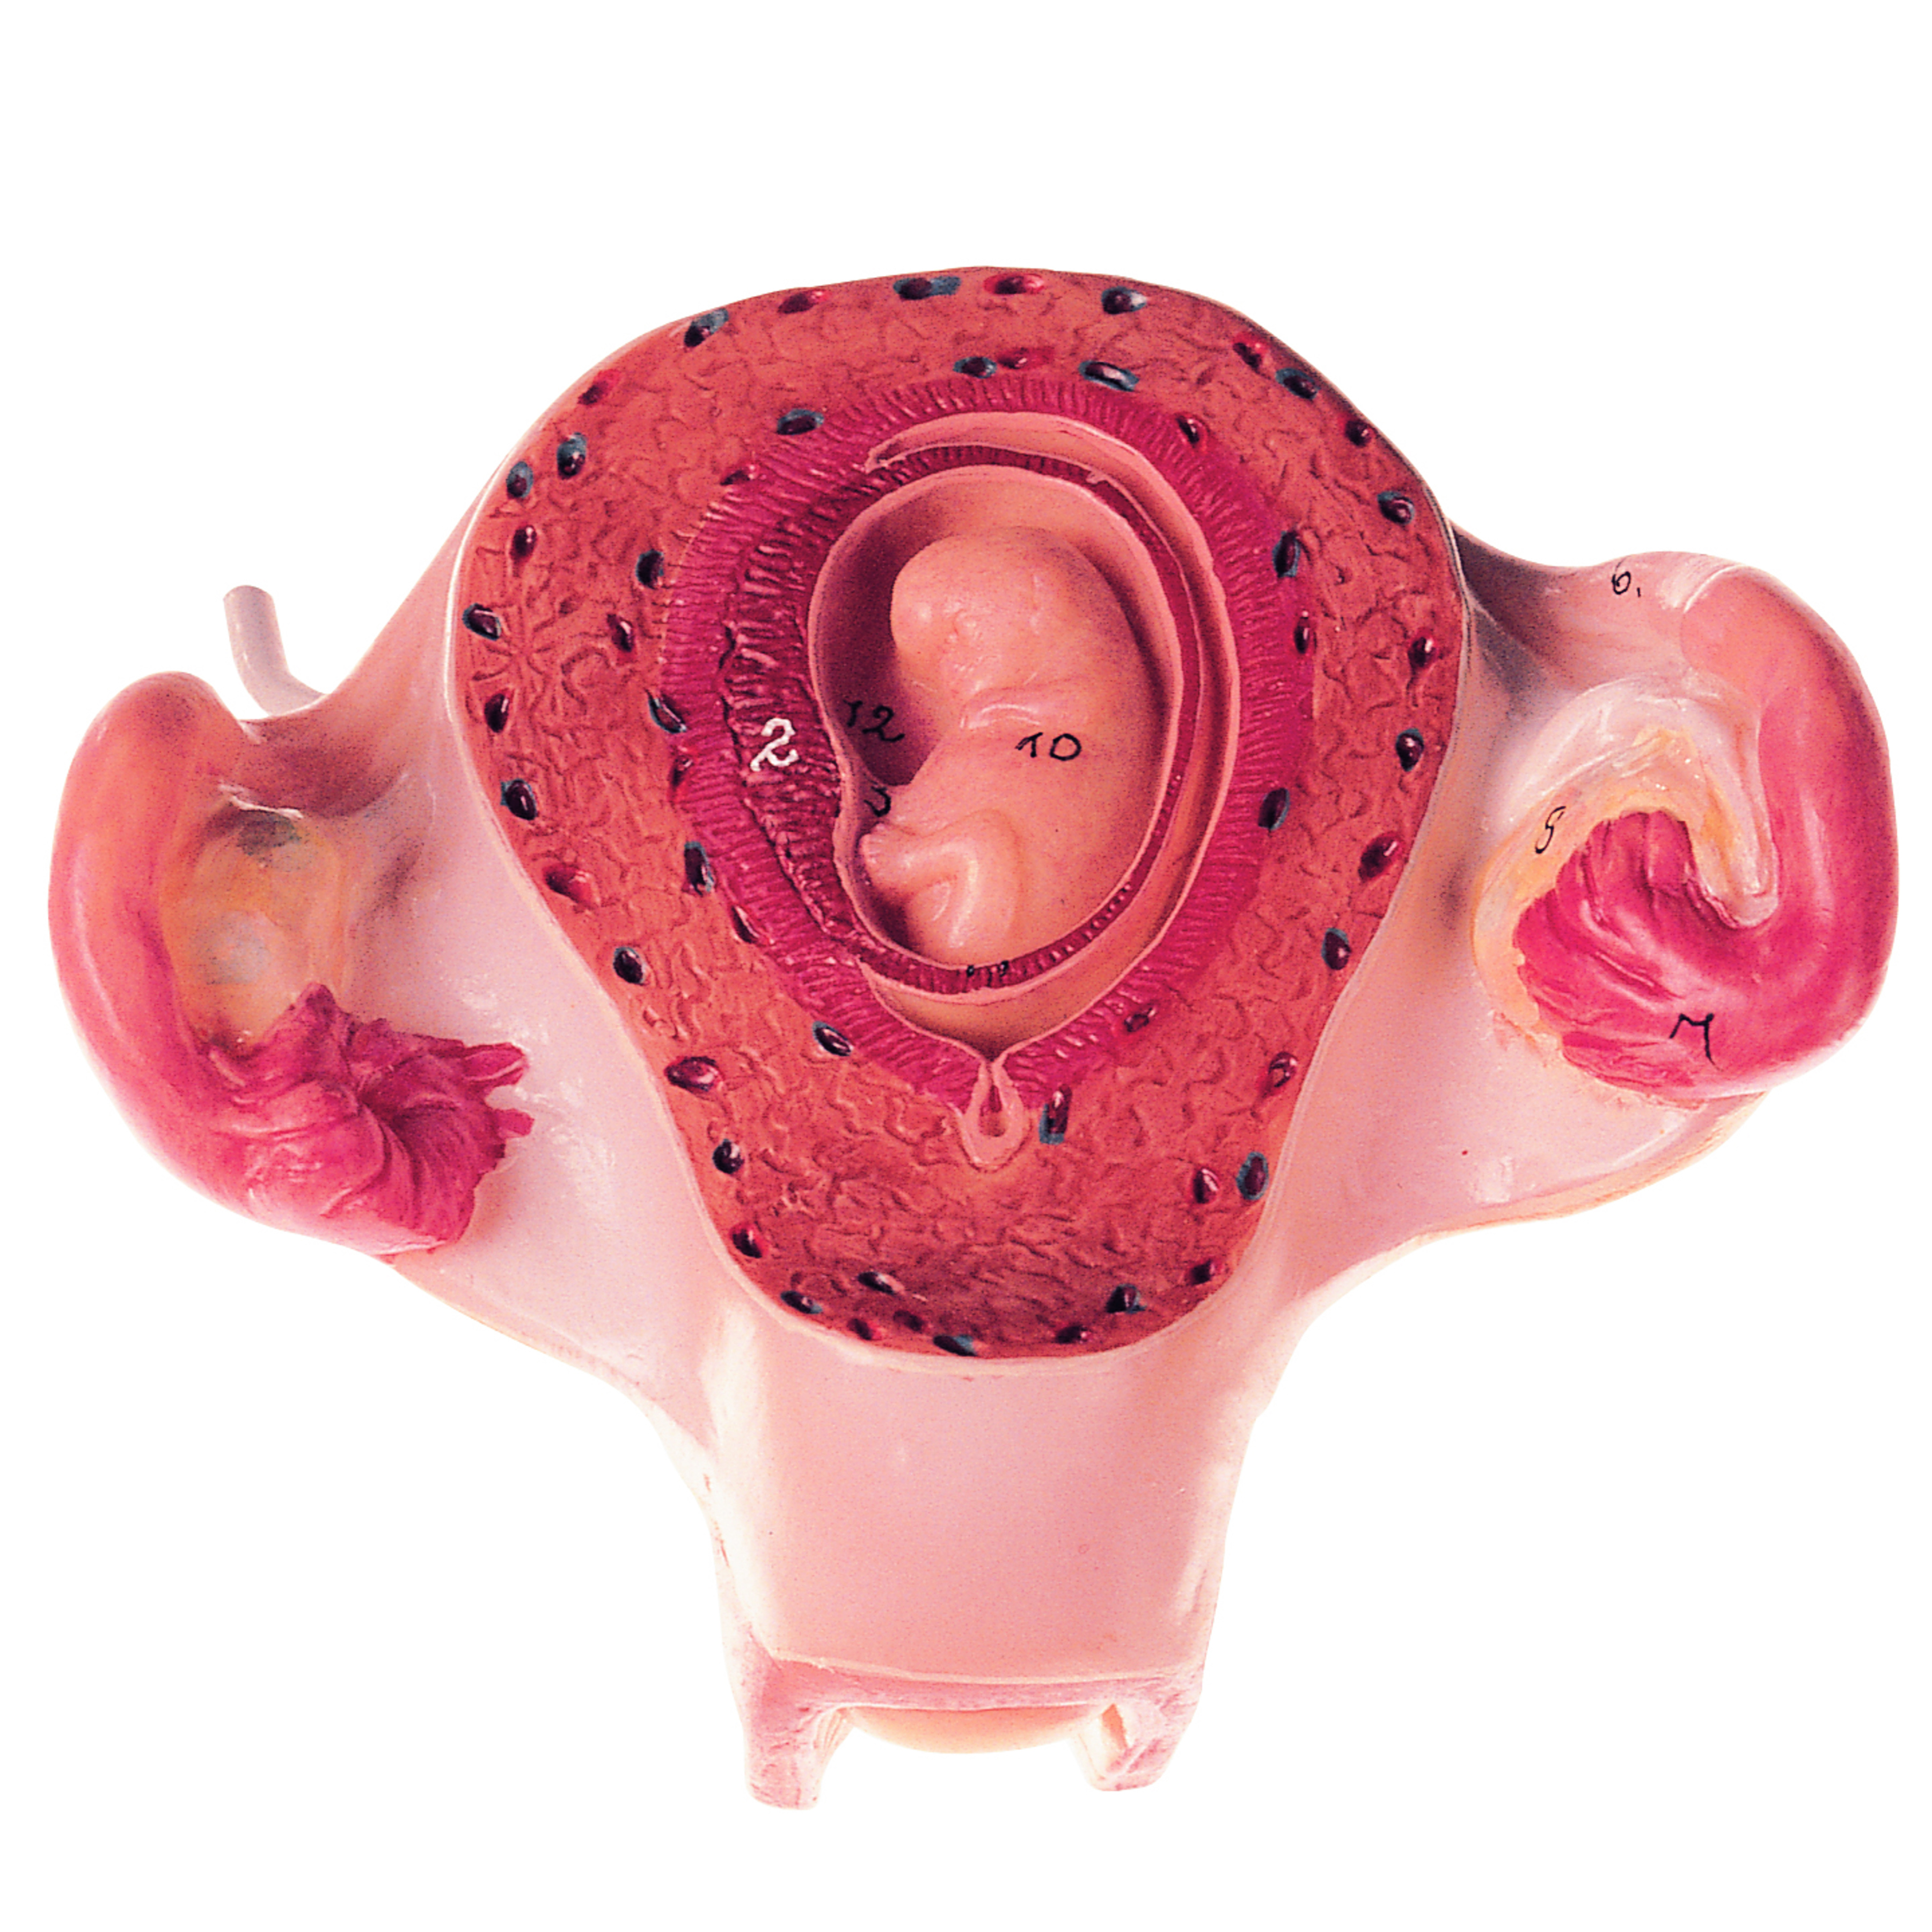 Uterus With Embryo in Second Month